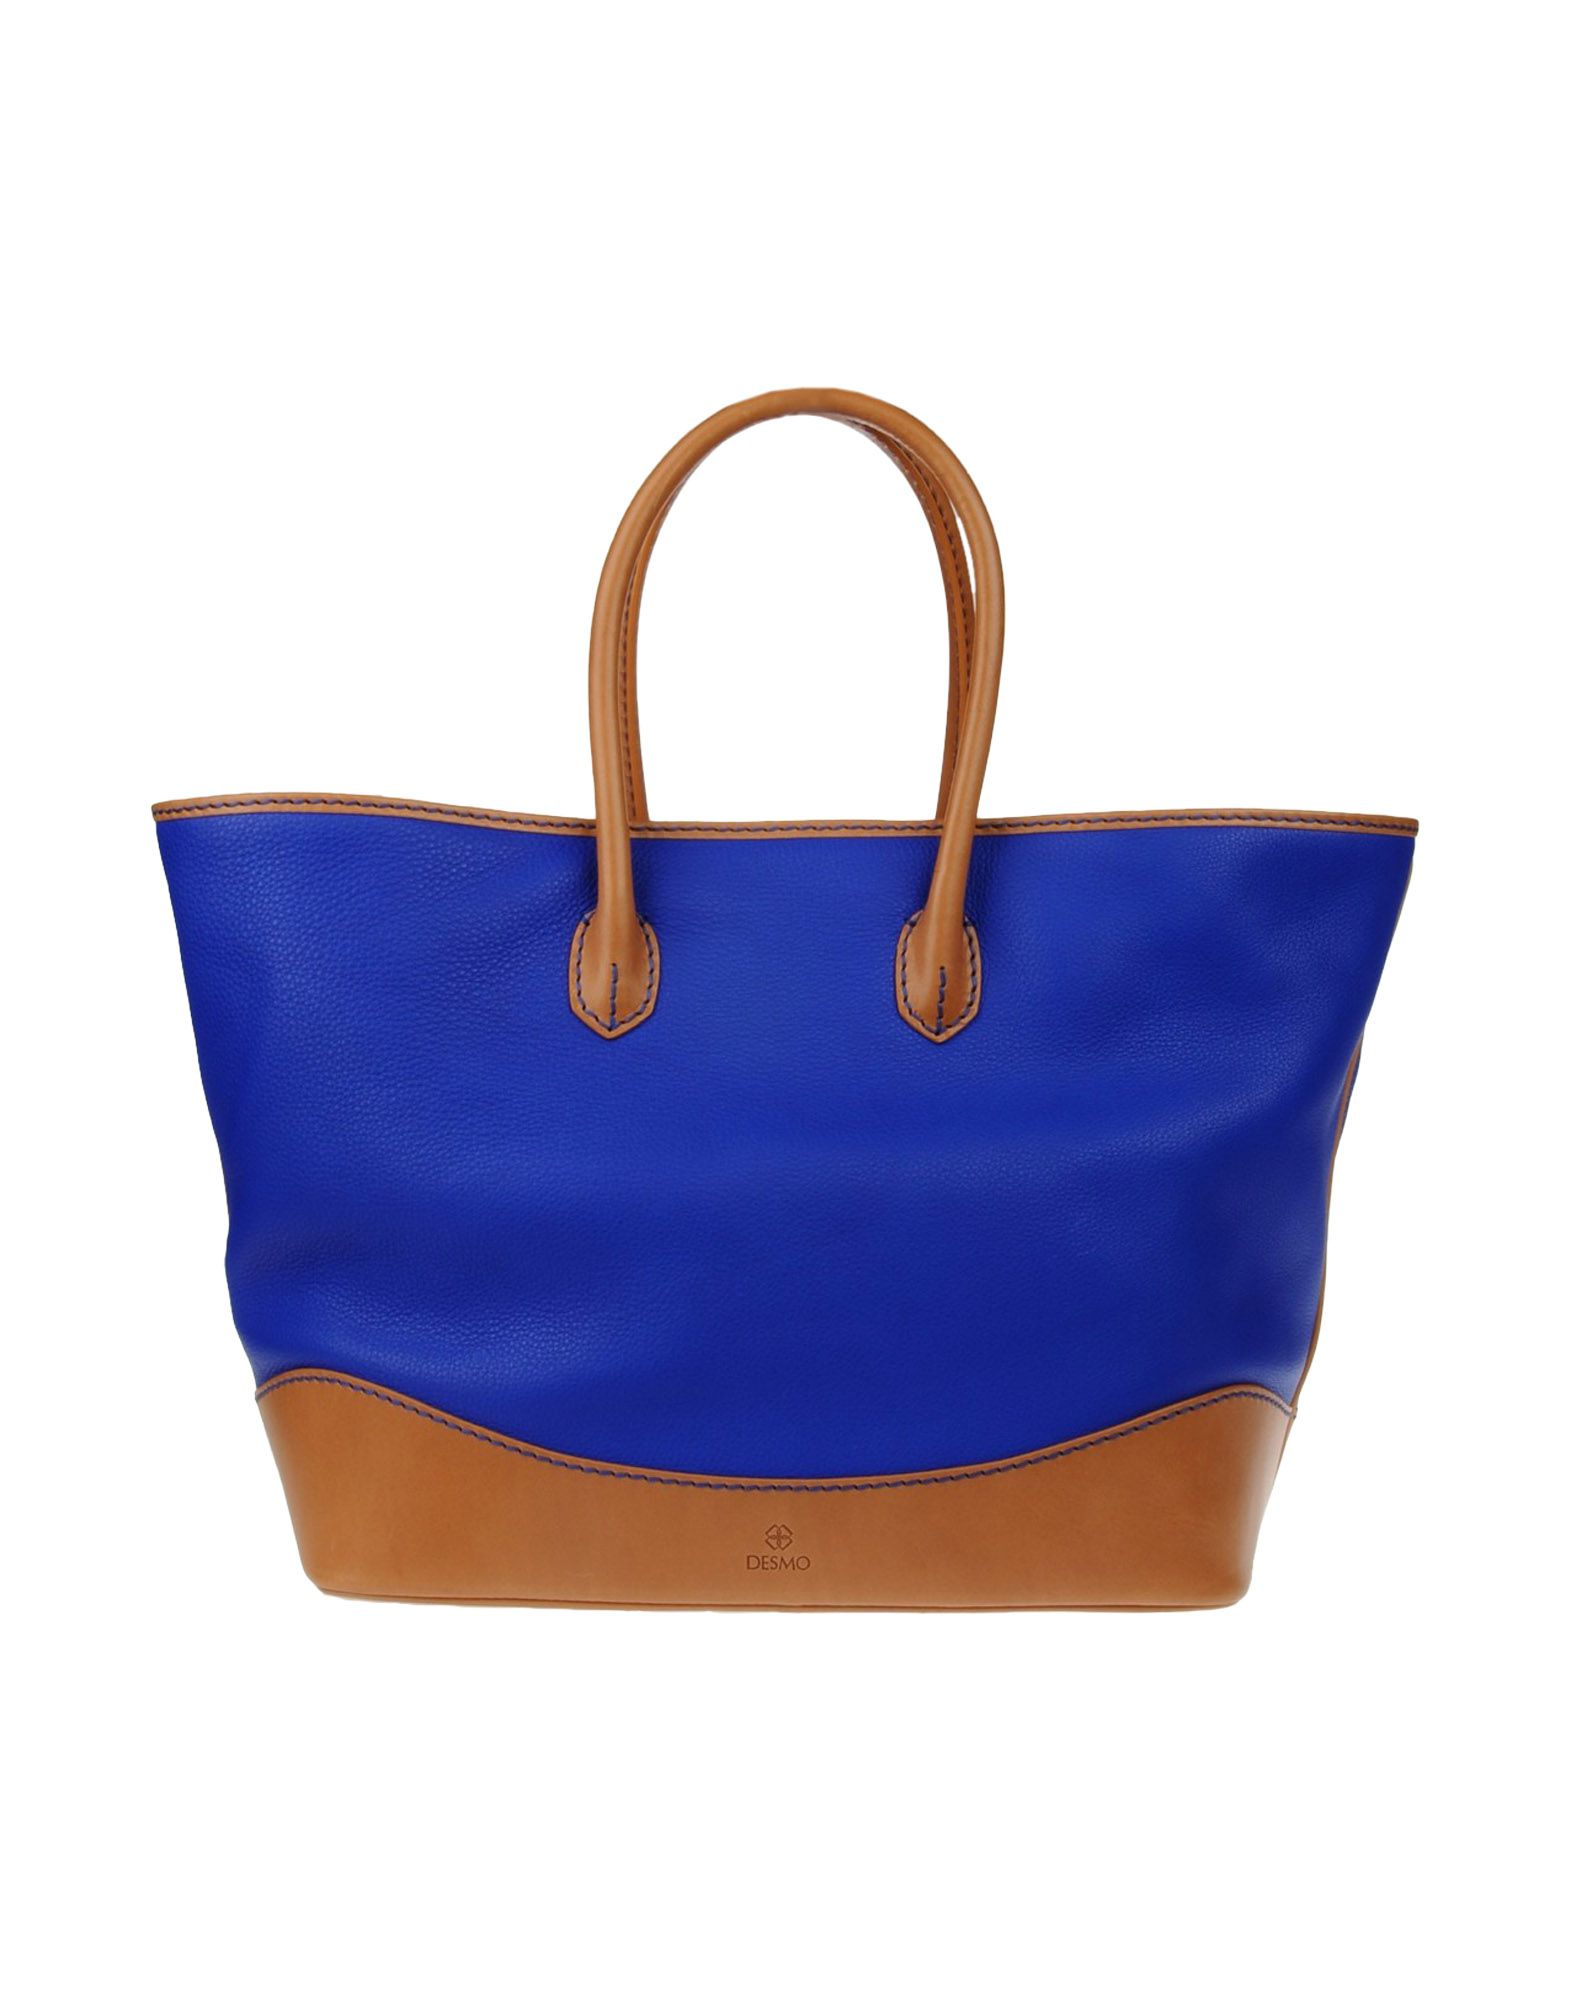 Desmo Large Leather Bag in Blue (Bright blue) | Lyst